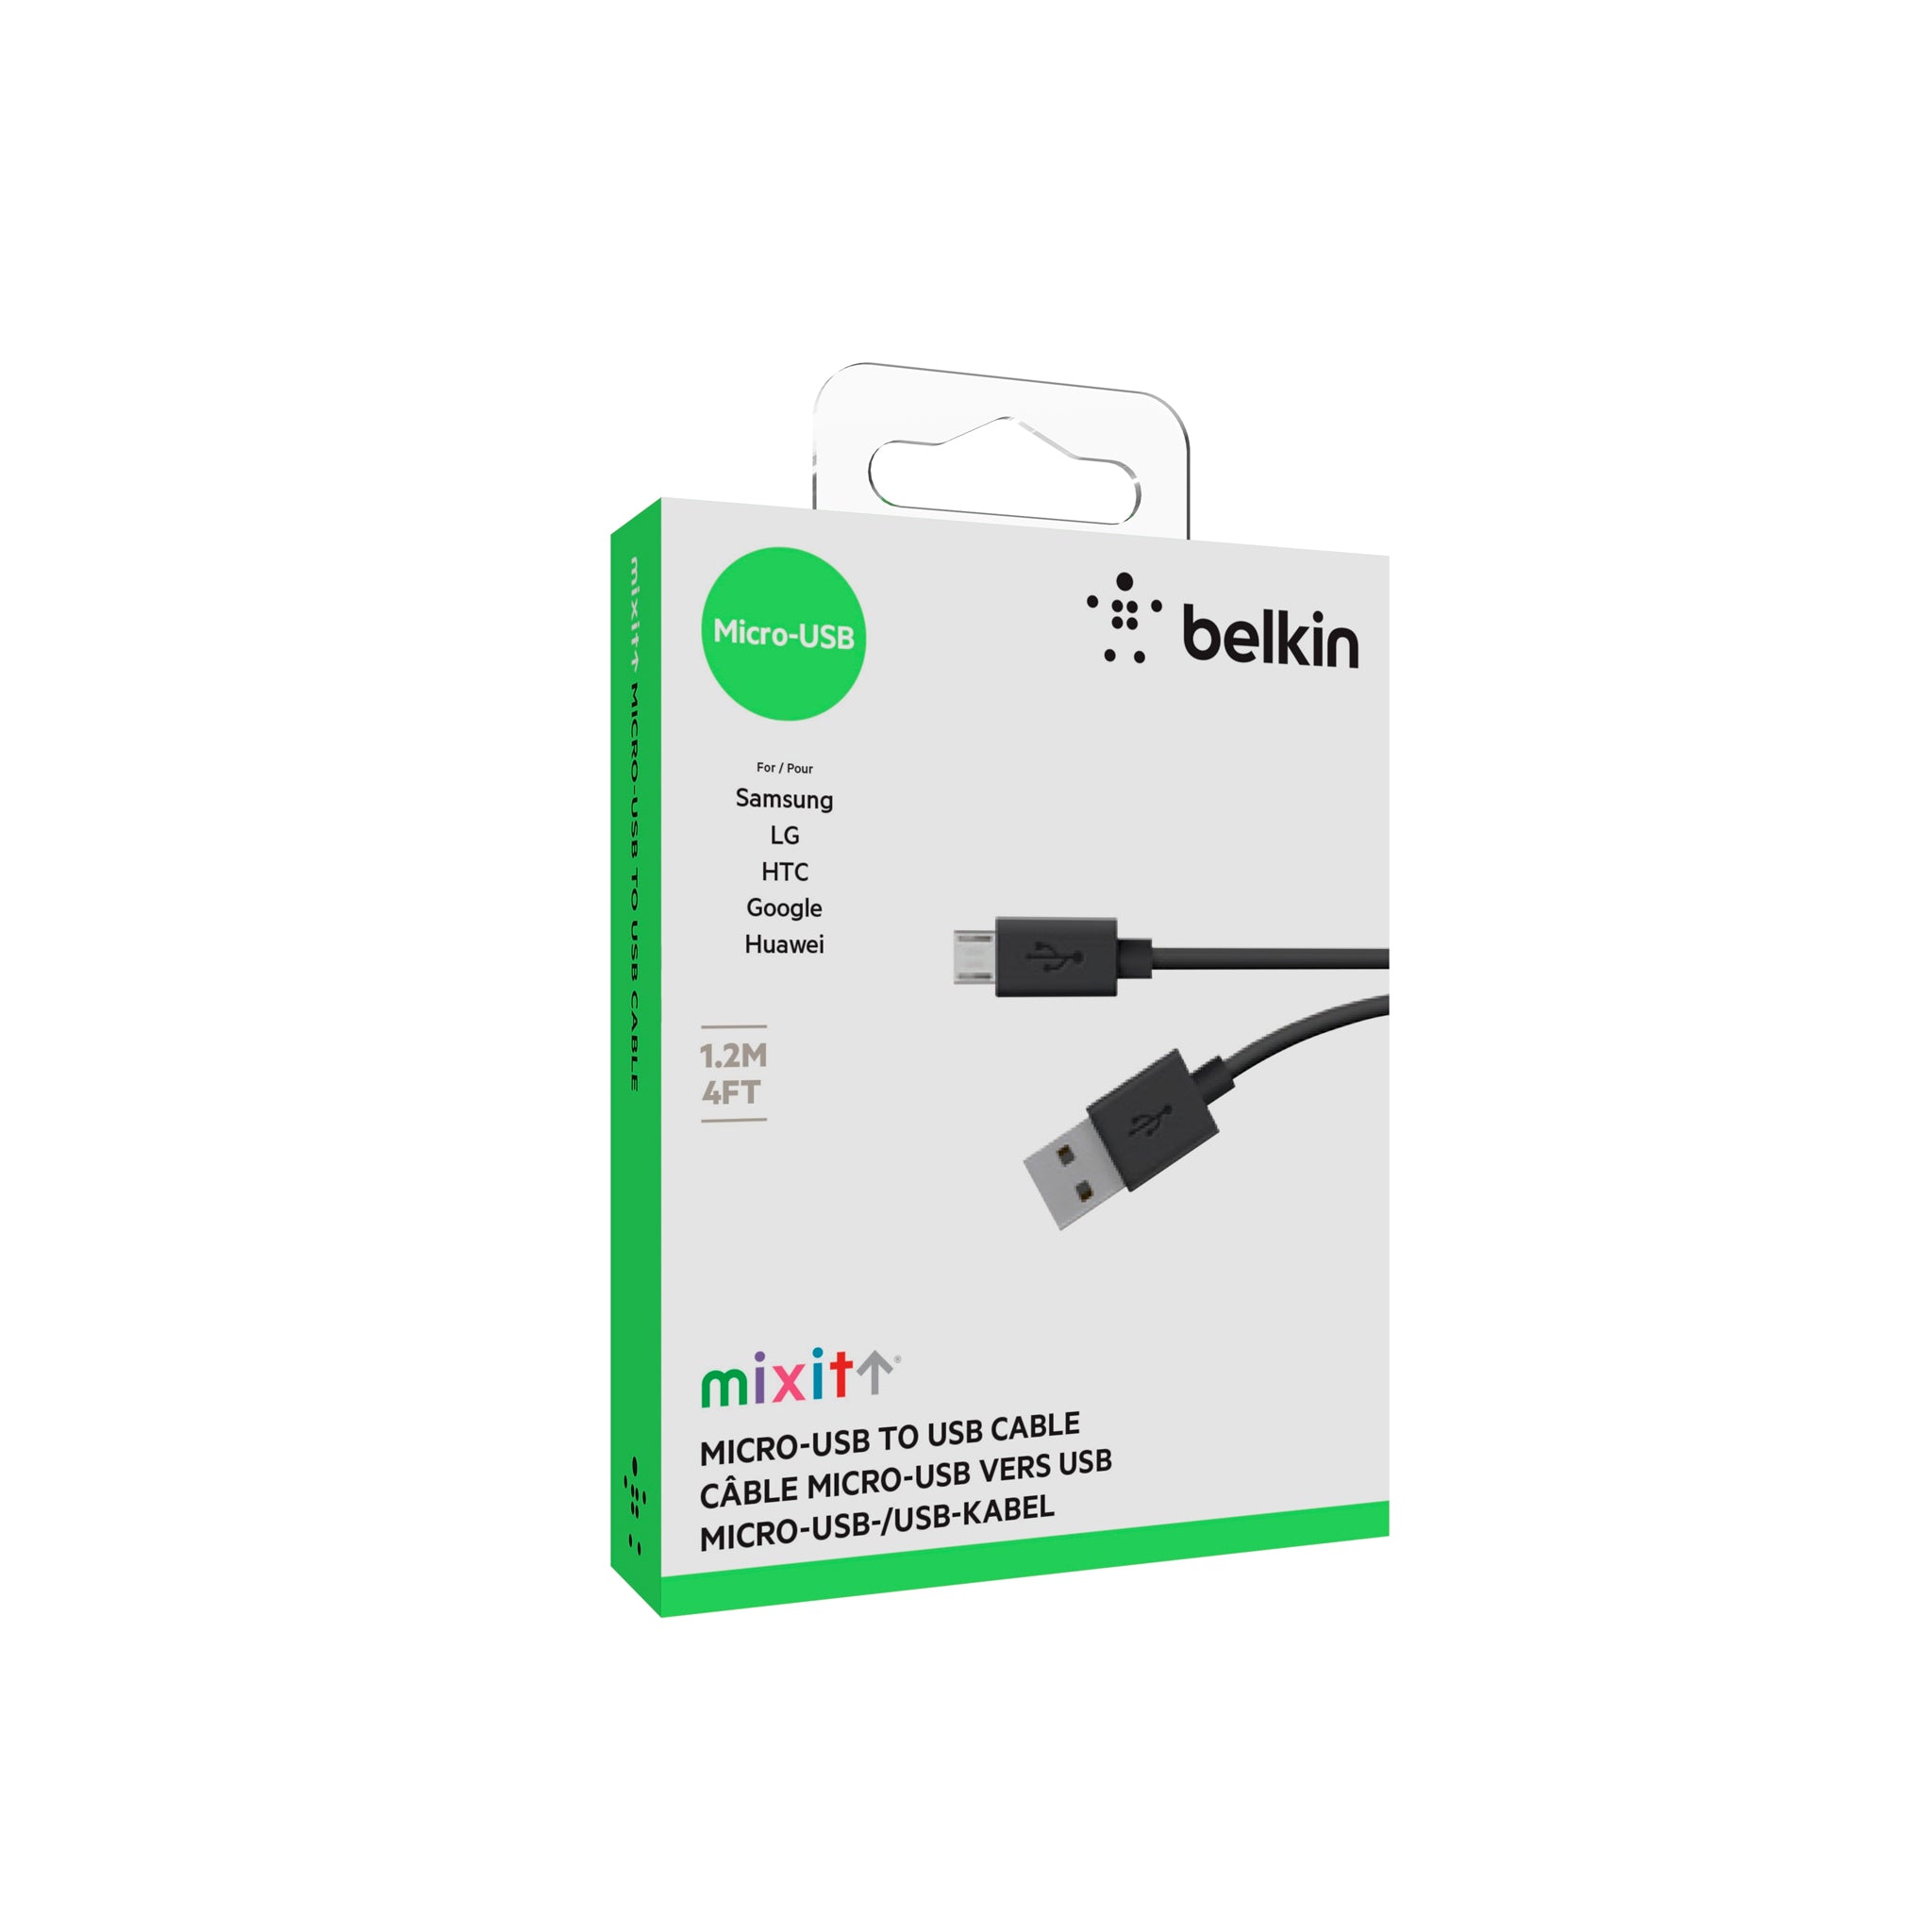 Belkin - Mixit Micro Usb Cable 10ft - Black